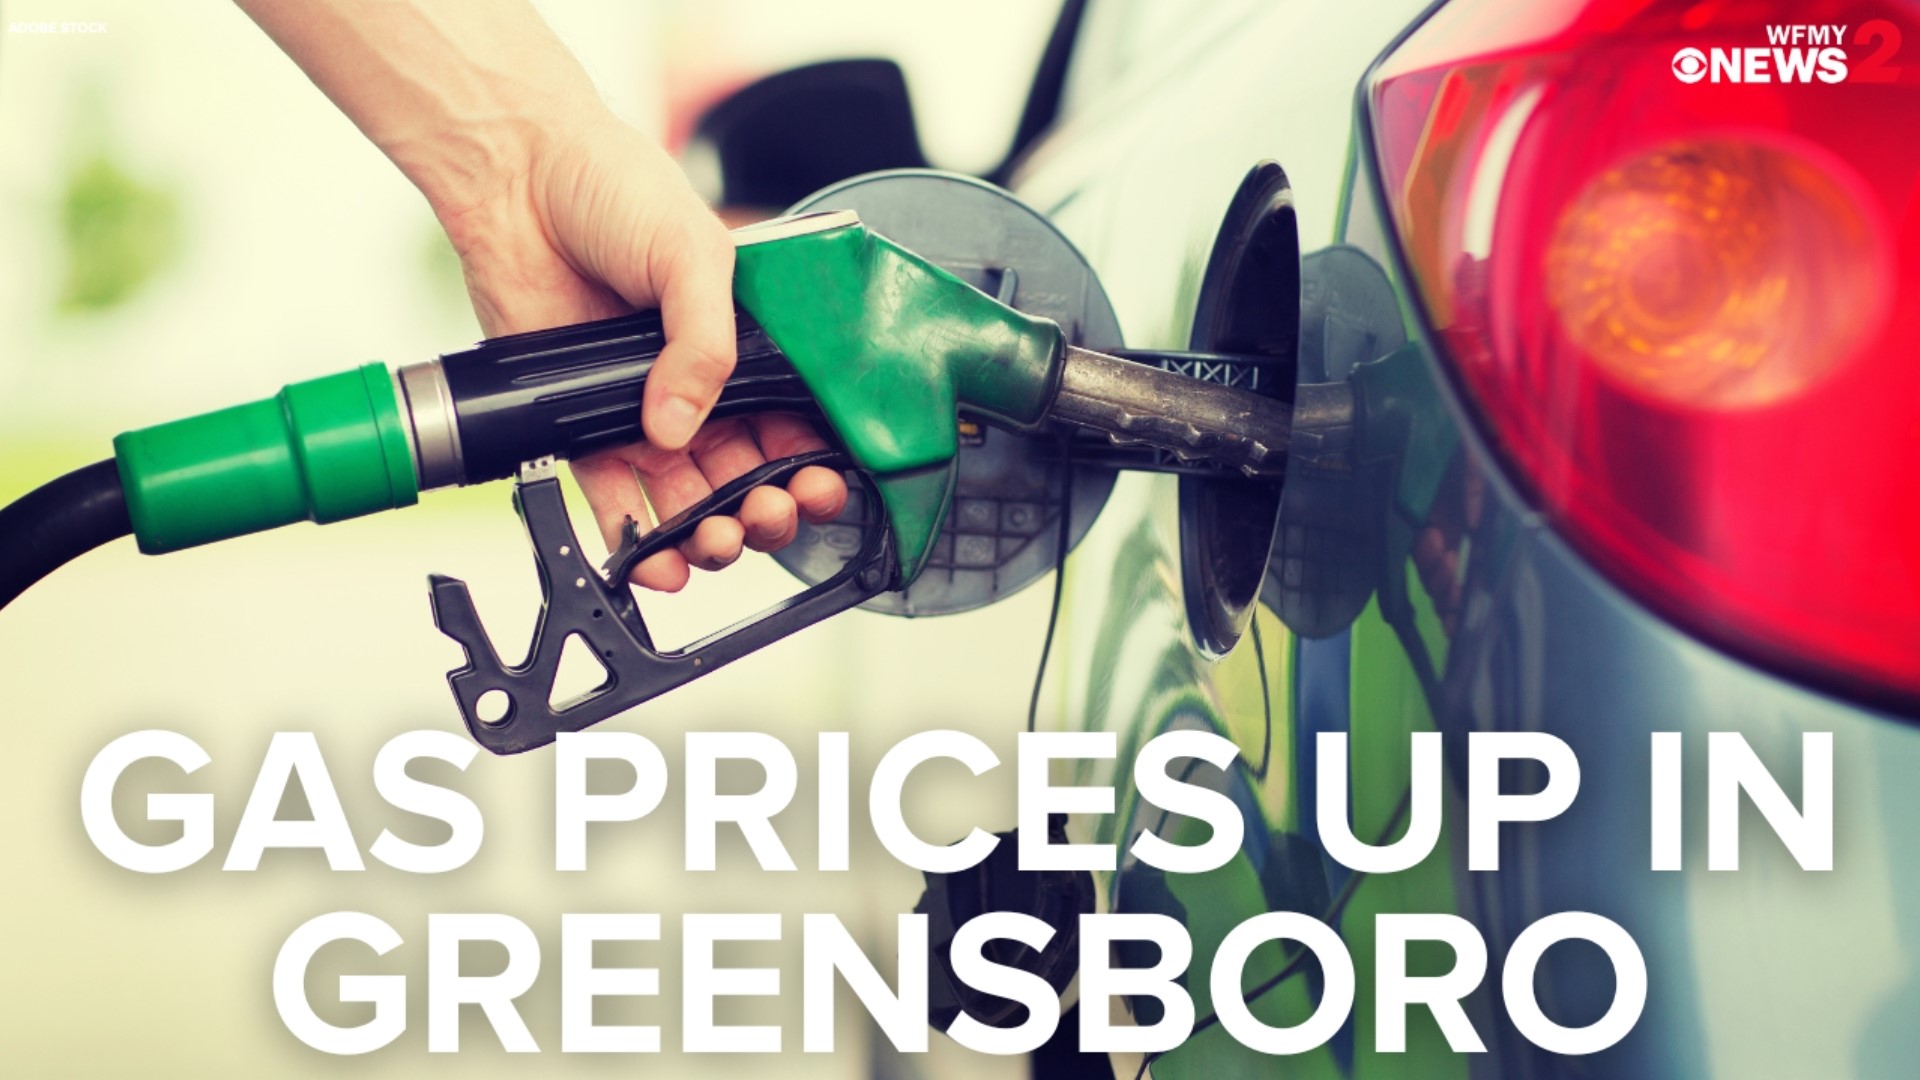 Gas prices are up in Greensboro. Concerns are increasing that without additional oil, supply will tighten in the weeks ahead.